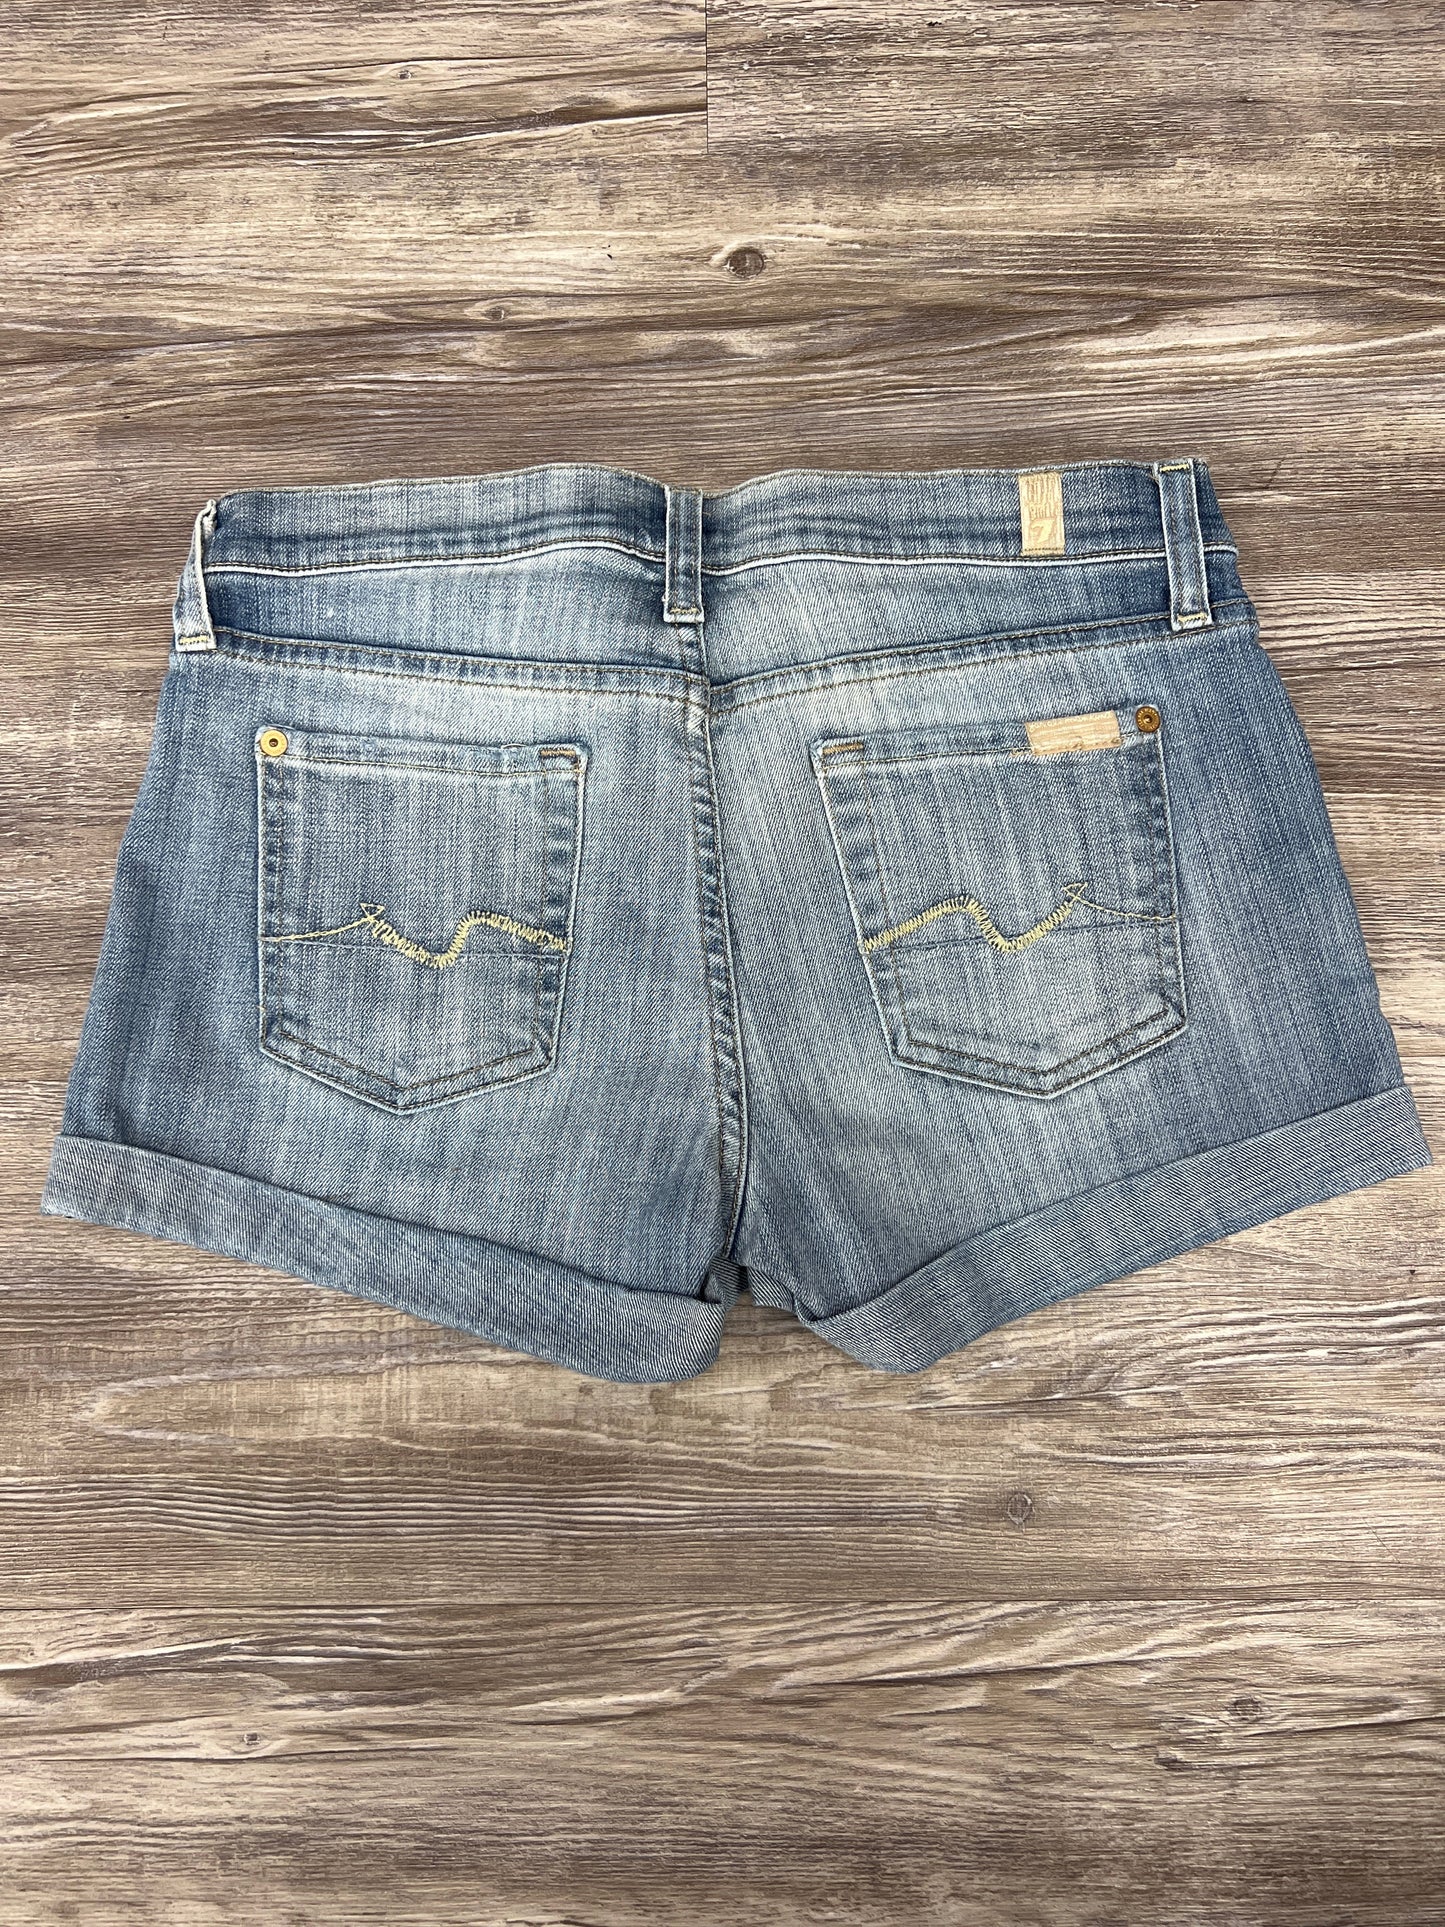 Shorts Designer By 7 For All Mankind Size: 2